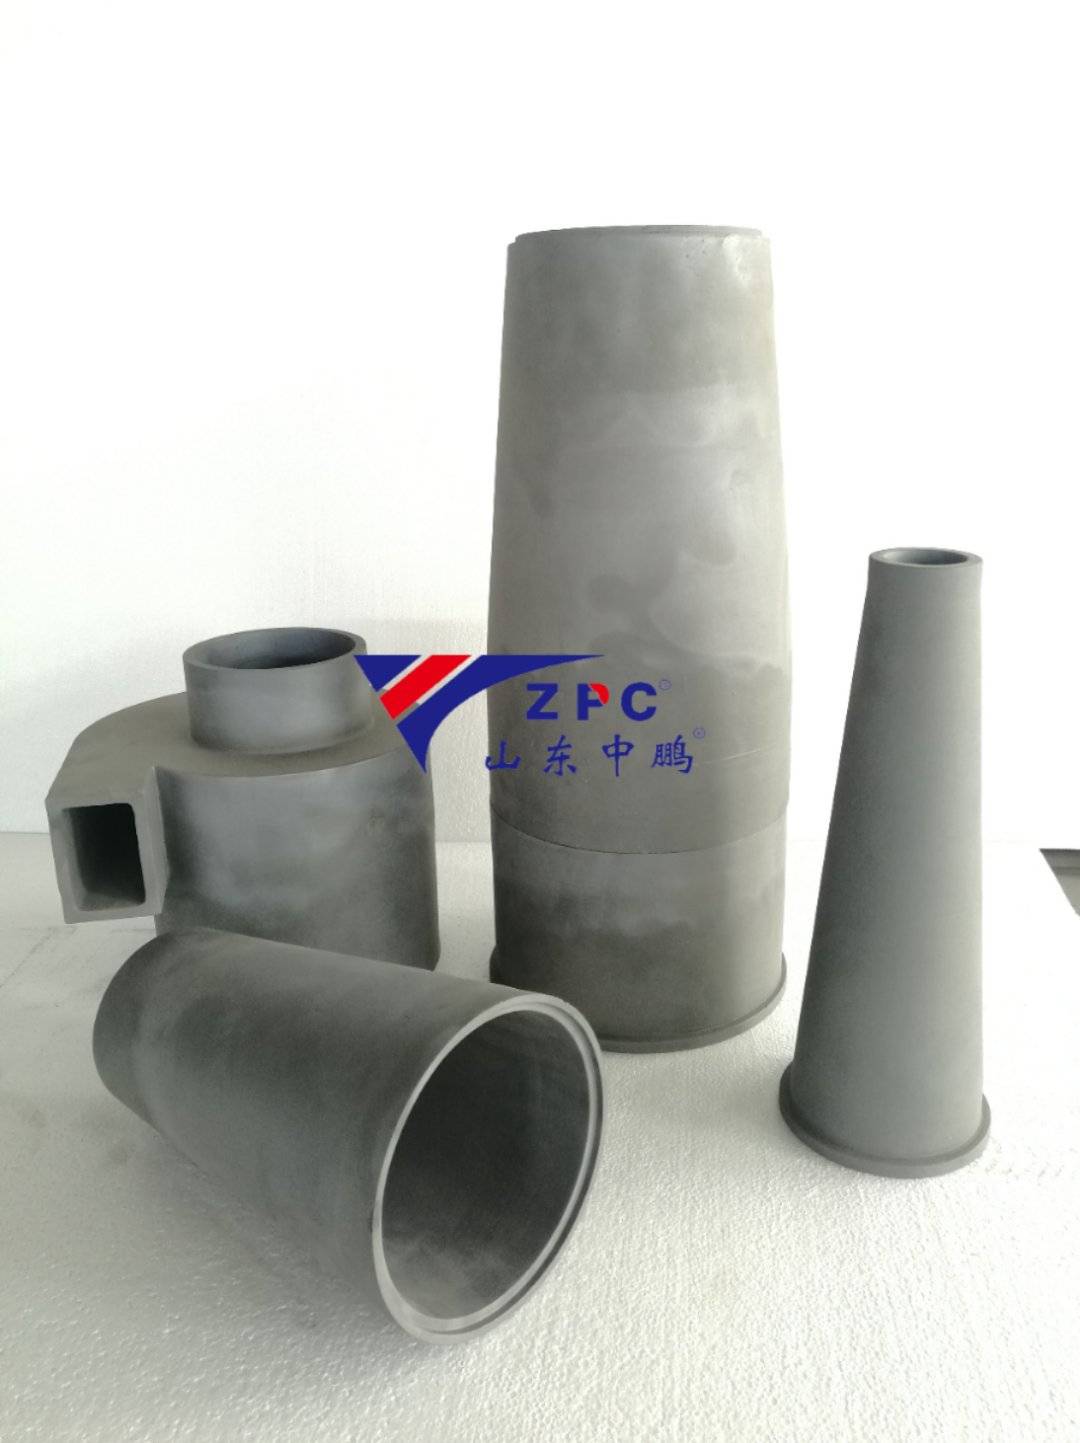 Wholesale Gas Radiant Tube Heaters -
 wear resistant ceramic lined apex – ZhongPeng